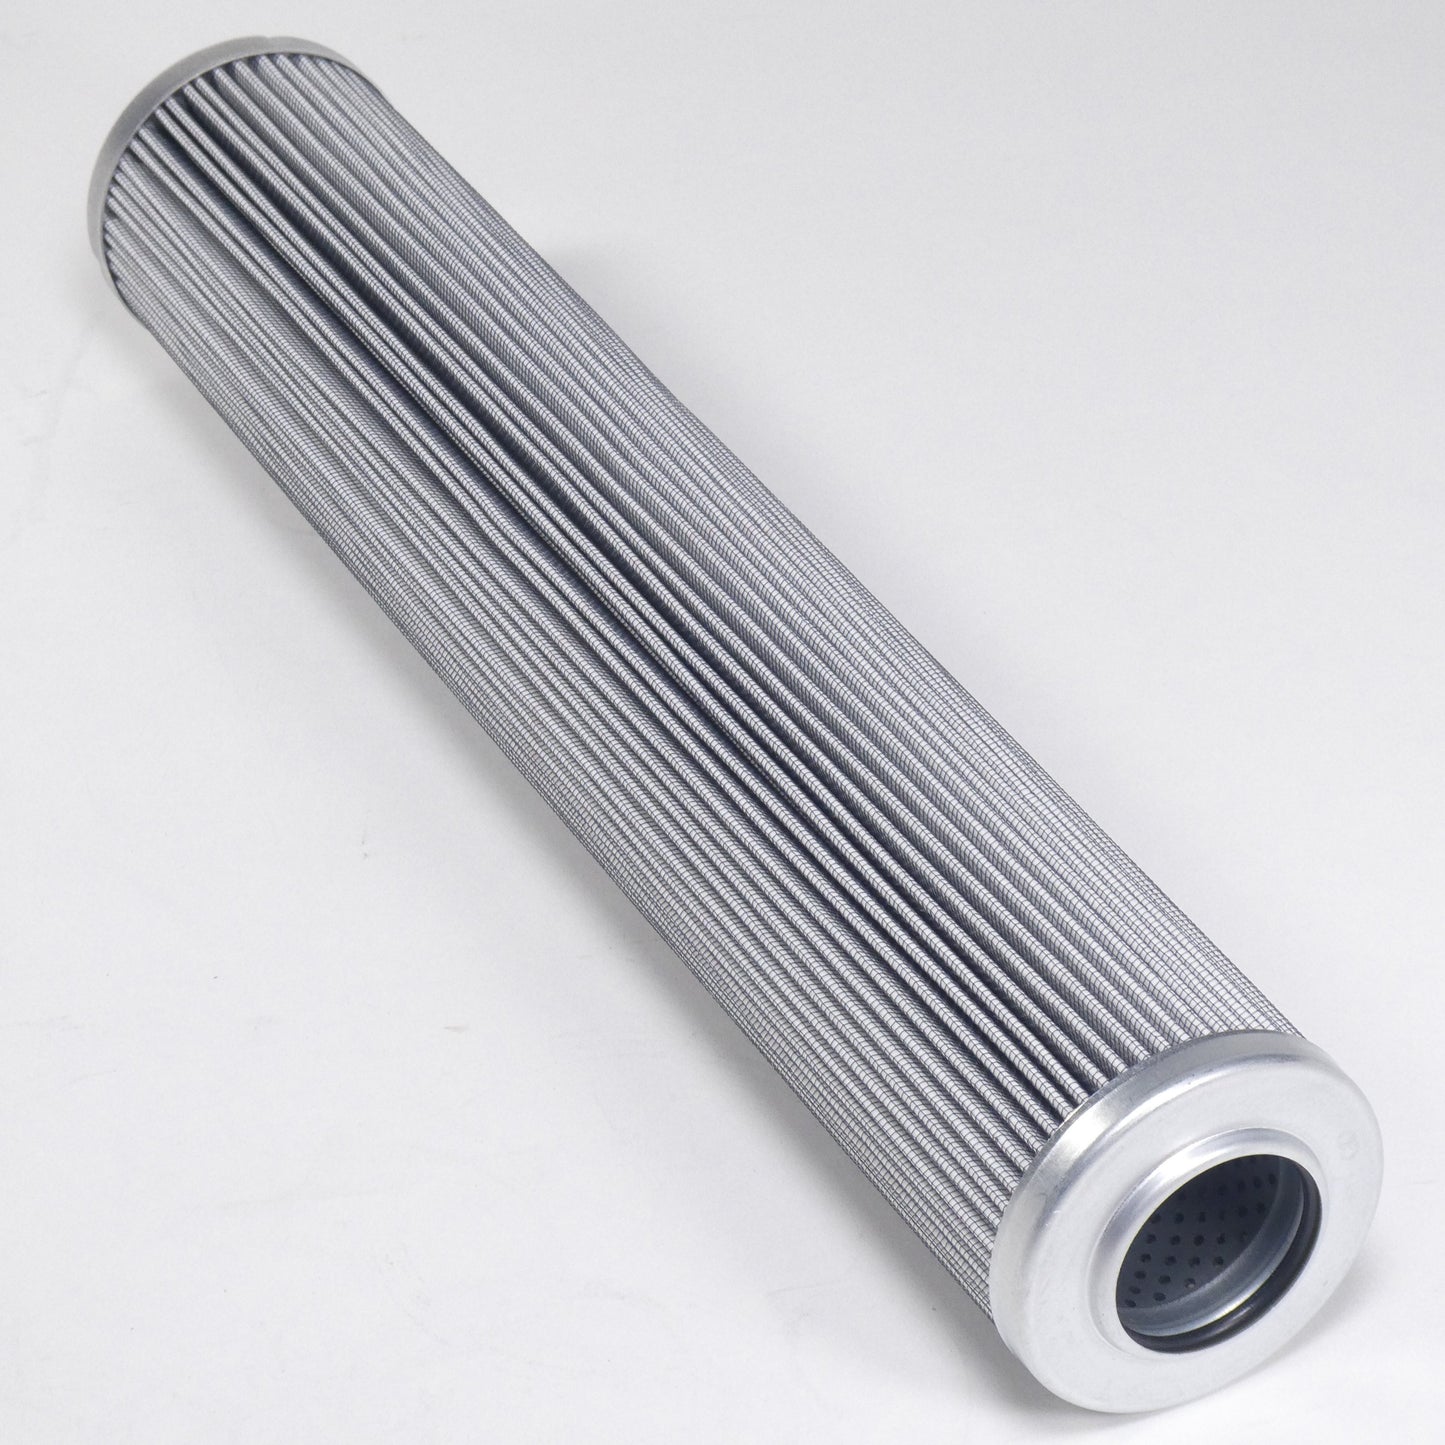 Hydrafil Replacement Filter Element for Diagnetics LPA316B03